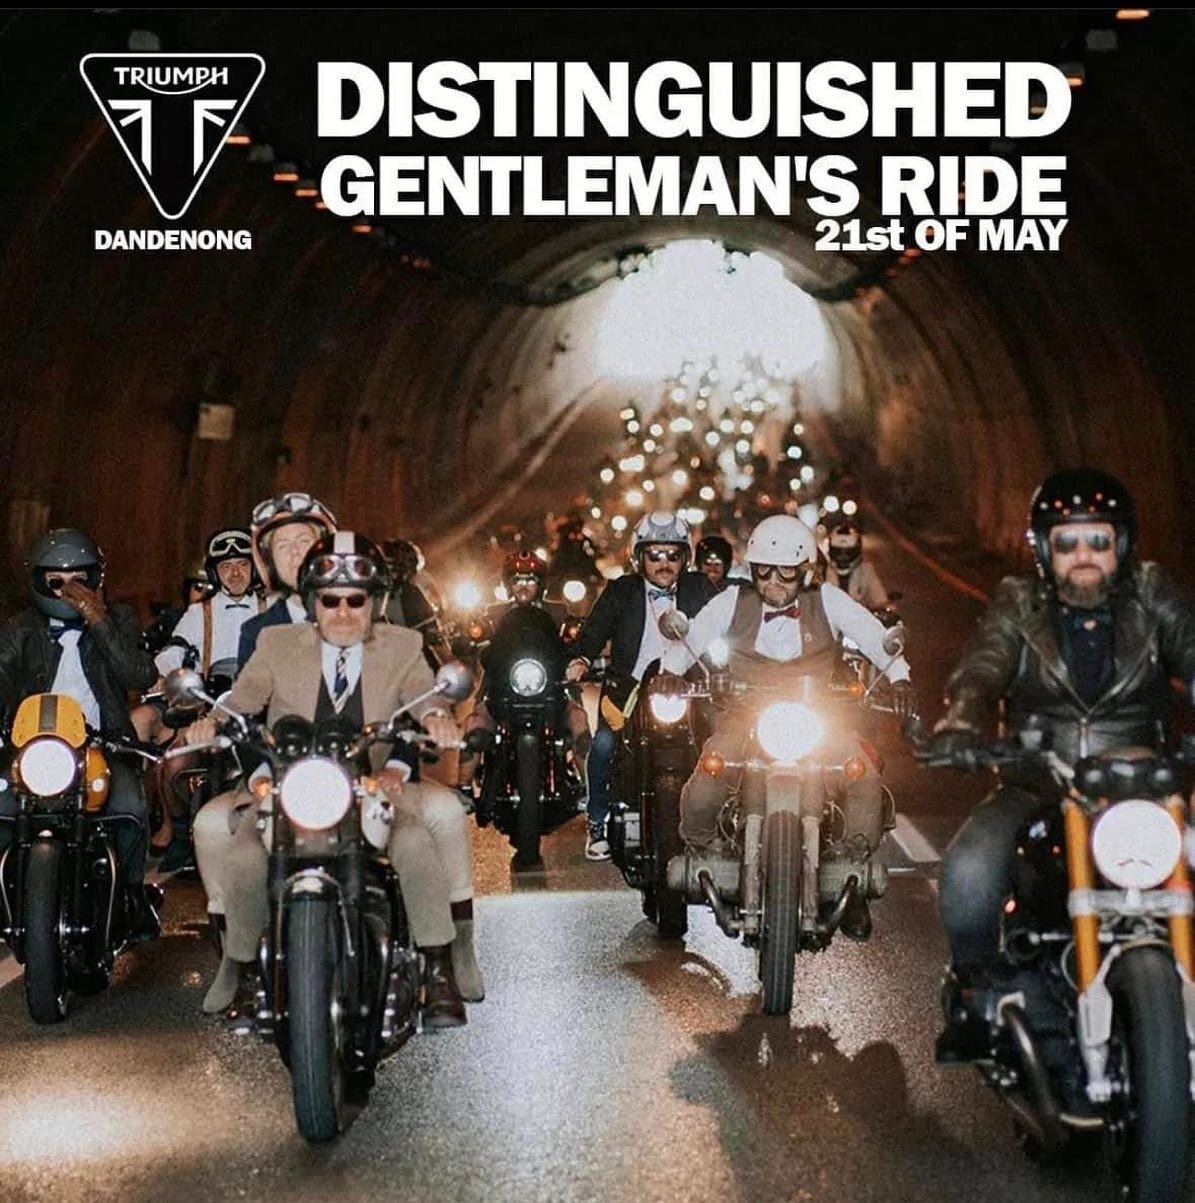 We&rsquo;ll be open from 7am this Sunday to see off the Riders in the 23 DRG.  We will be doing a special Woodoven breakfast pizza,pressed focaccias, pastries and of course Coffee.  #distinguisedgentlemansride @peterstevens.triumph